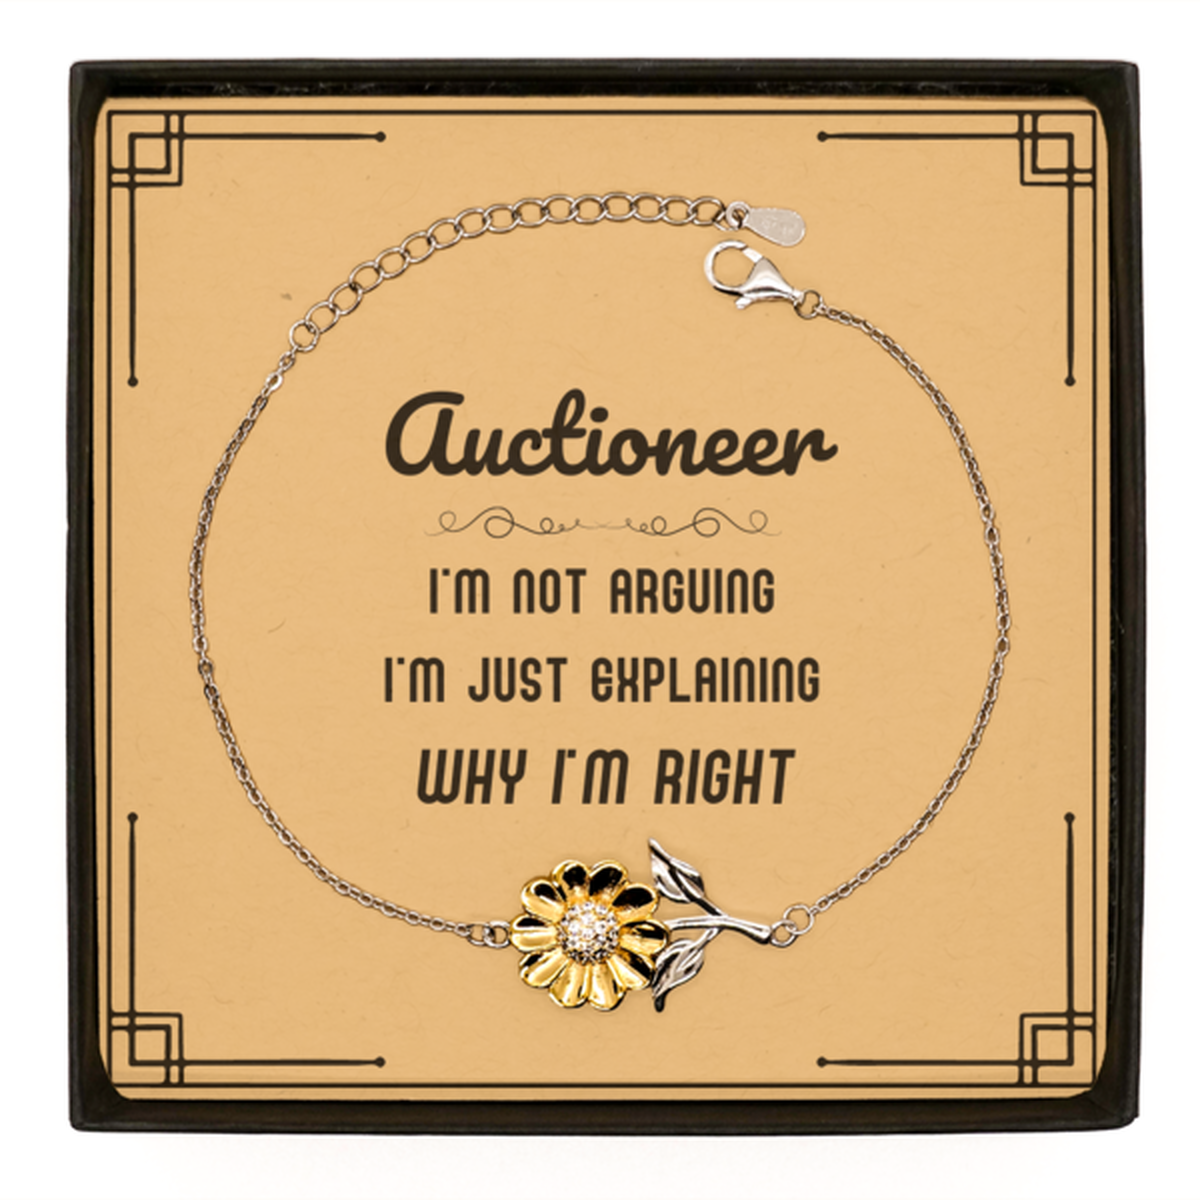 Auctioneer I'm not Arguing. I'm Just Explaining Why I'm RIGHT Sunflower Bracelet, Funny Saying Quote Auctioneer Gifts For Auctioneer Message Card Graduation Birthday Christmas Gifts for Men Women Coworker